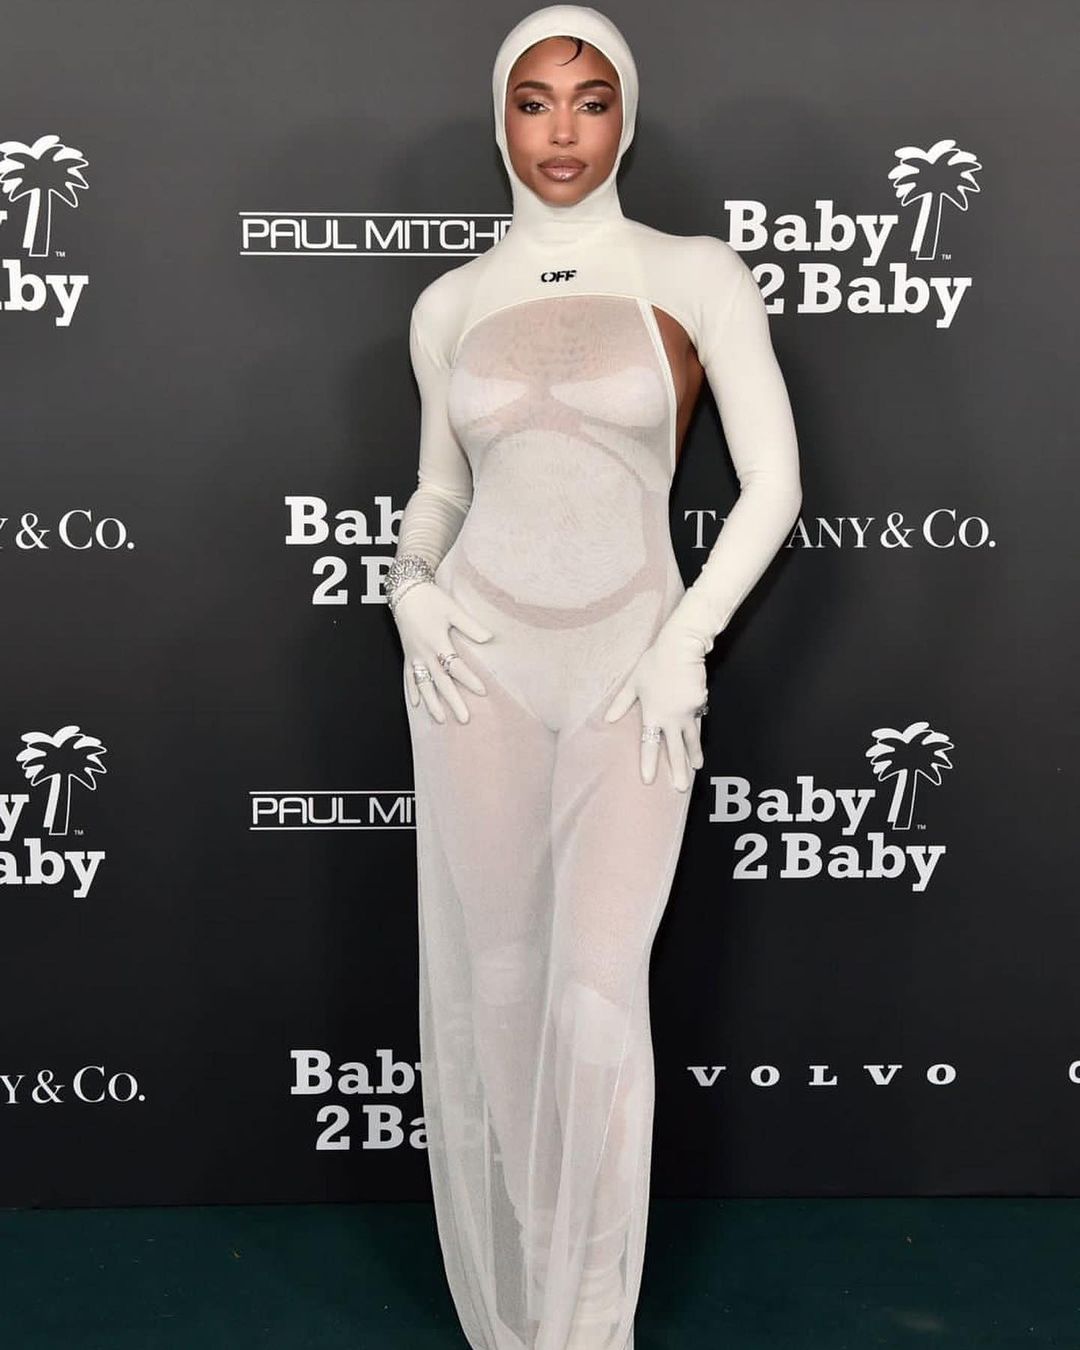 Lori attended the Baby2Baby event dressed in Off-White Spring Summer 2023